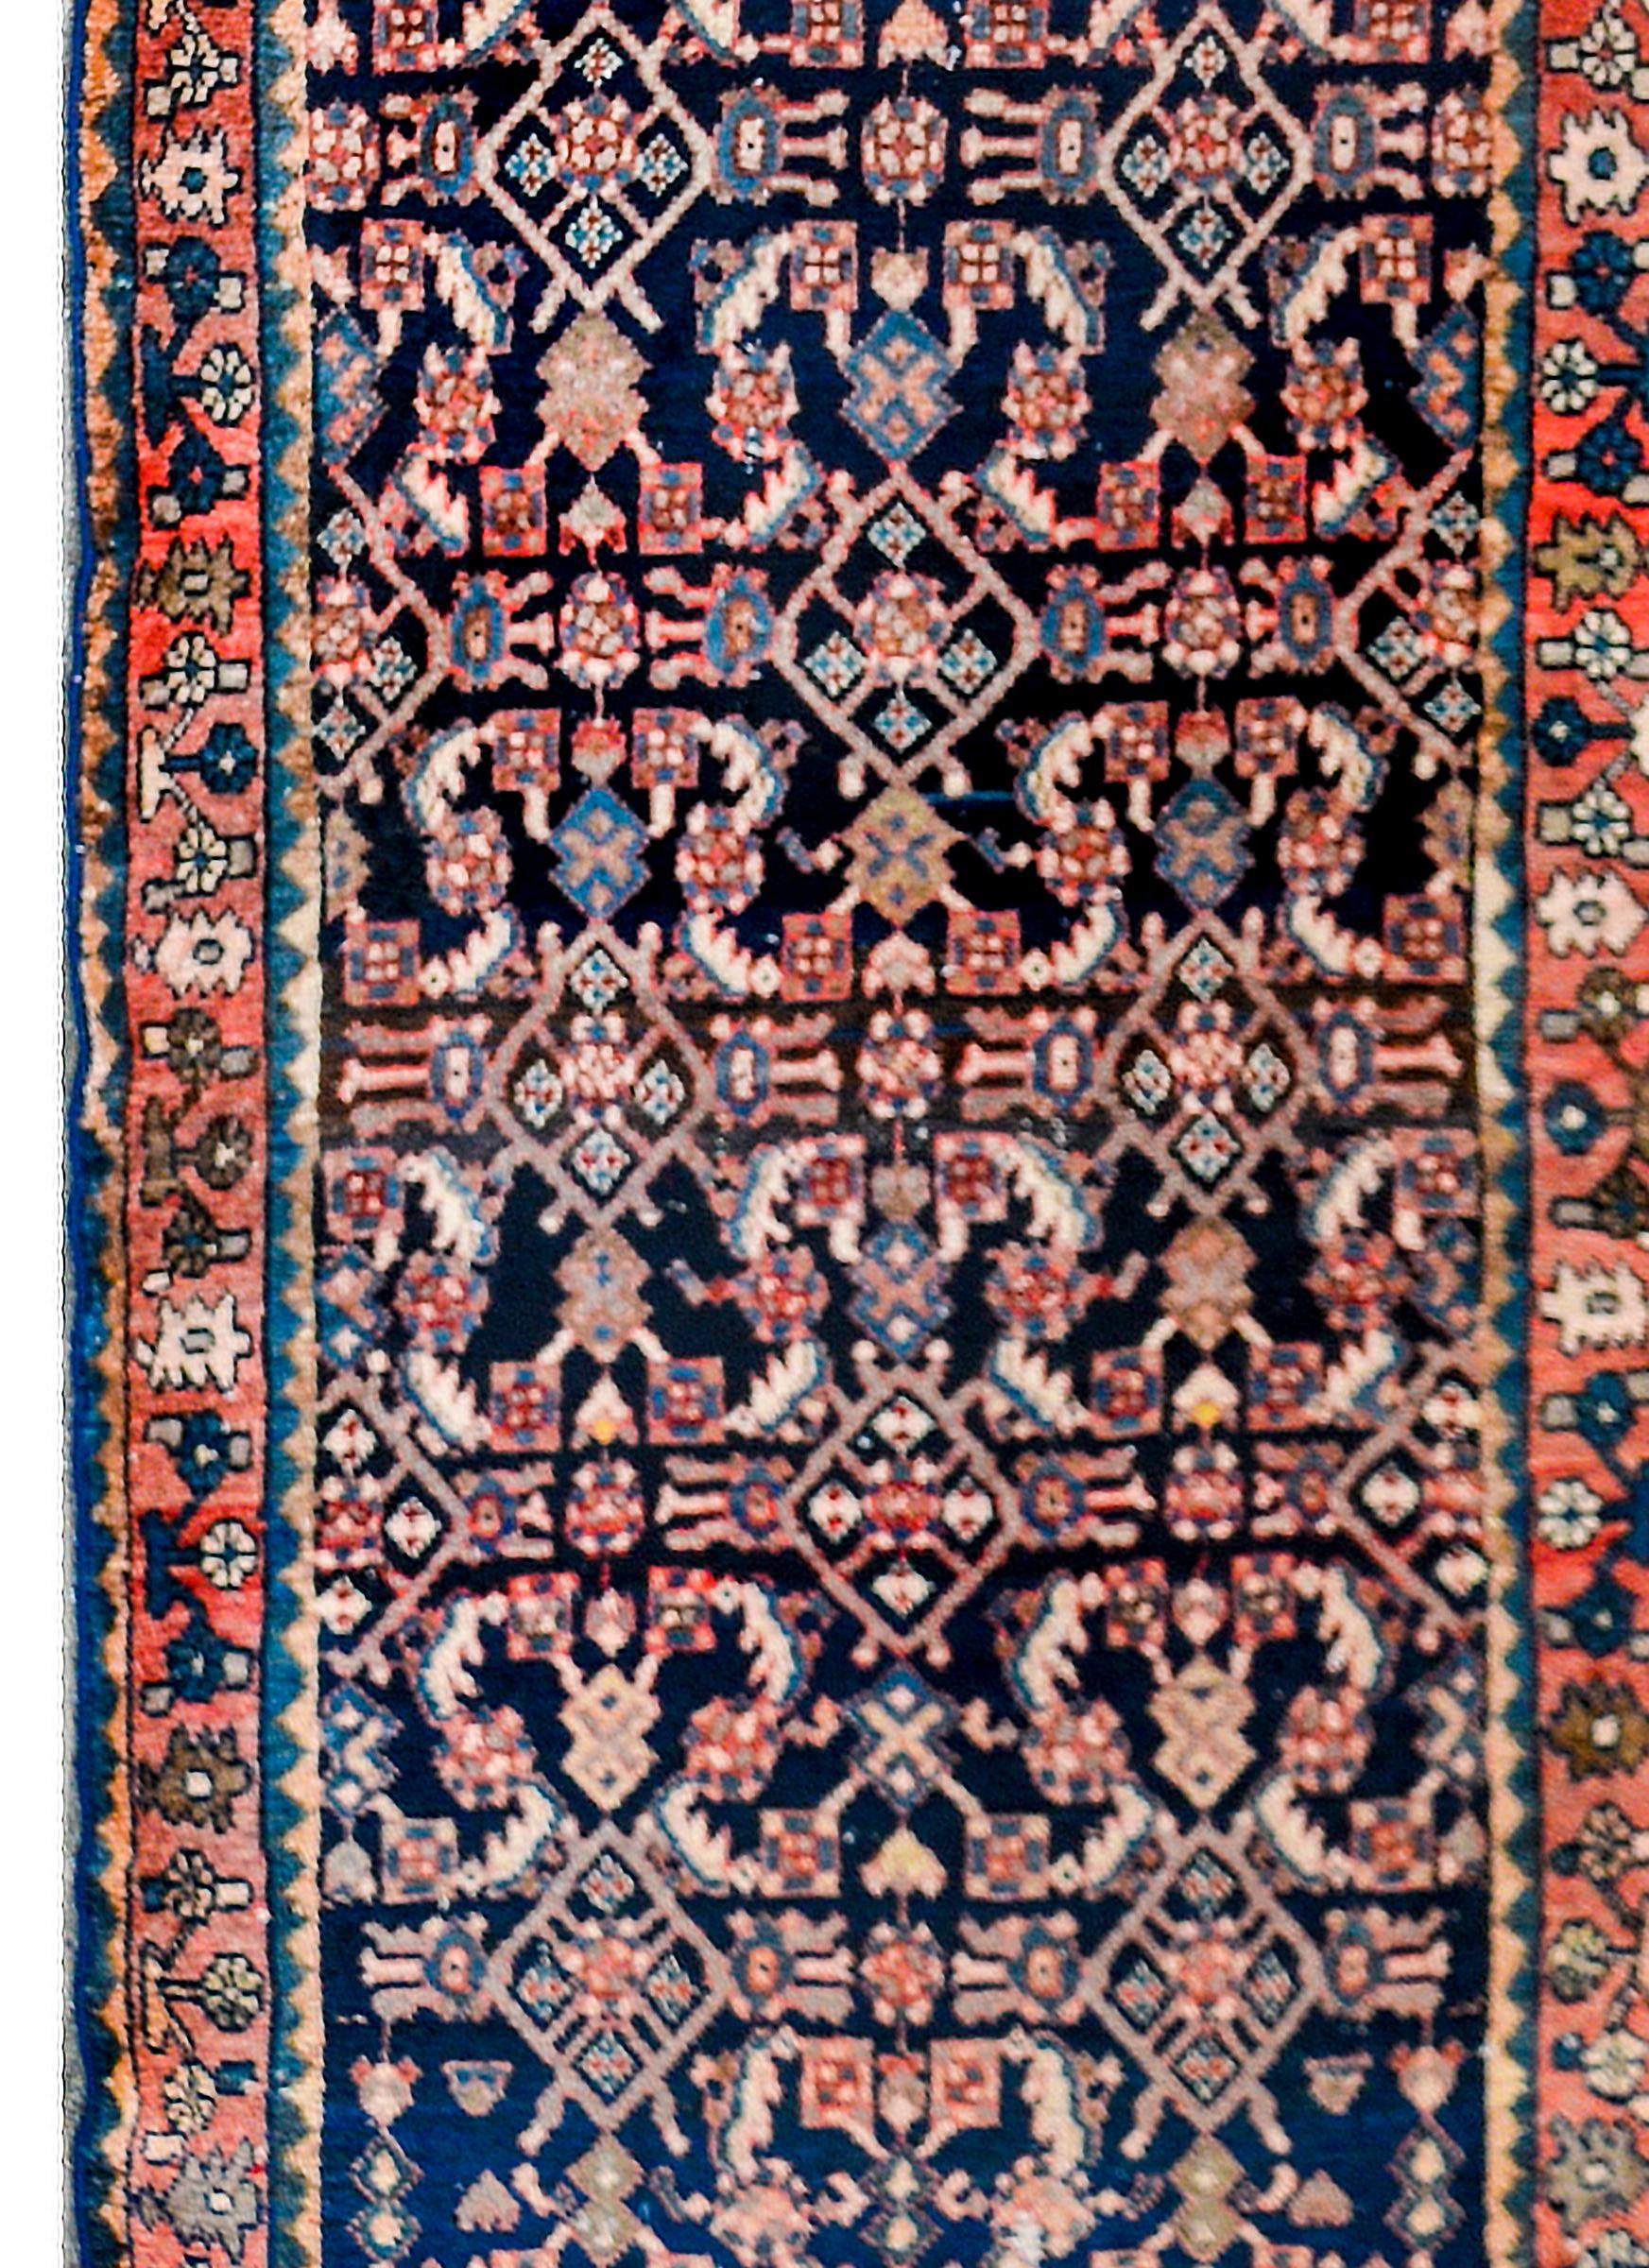 A fantastic early-20th century Persian Hamadan rug with an all-over mirrored trellis pattern of flowers and vines, woven in crimson, pink, light indigo, and white colored wool, on a dark indigo background. The border is complex with a large-scale